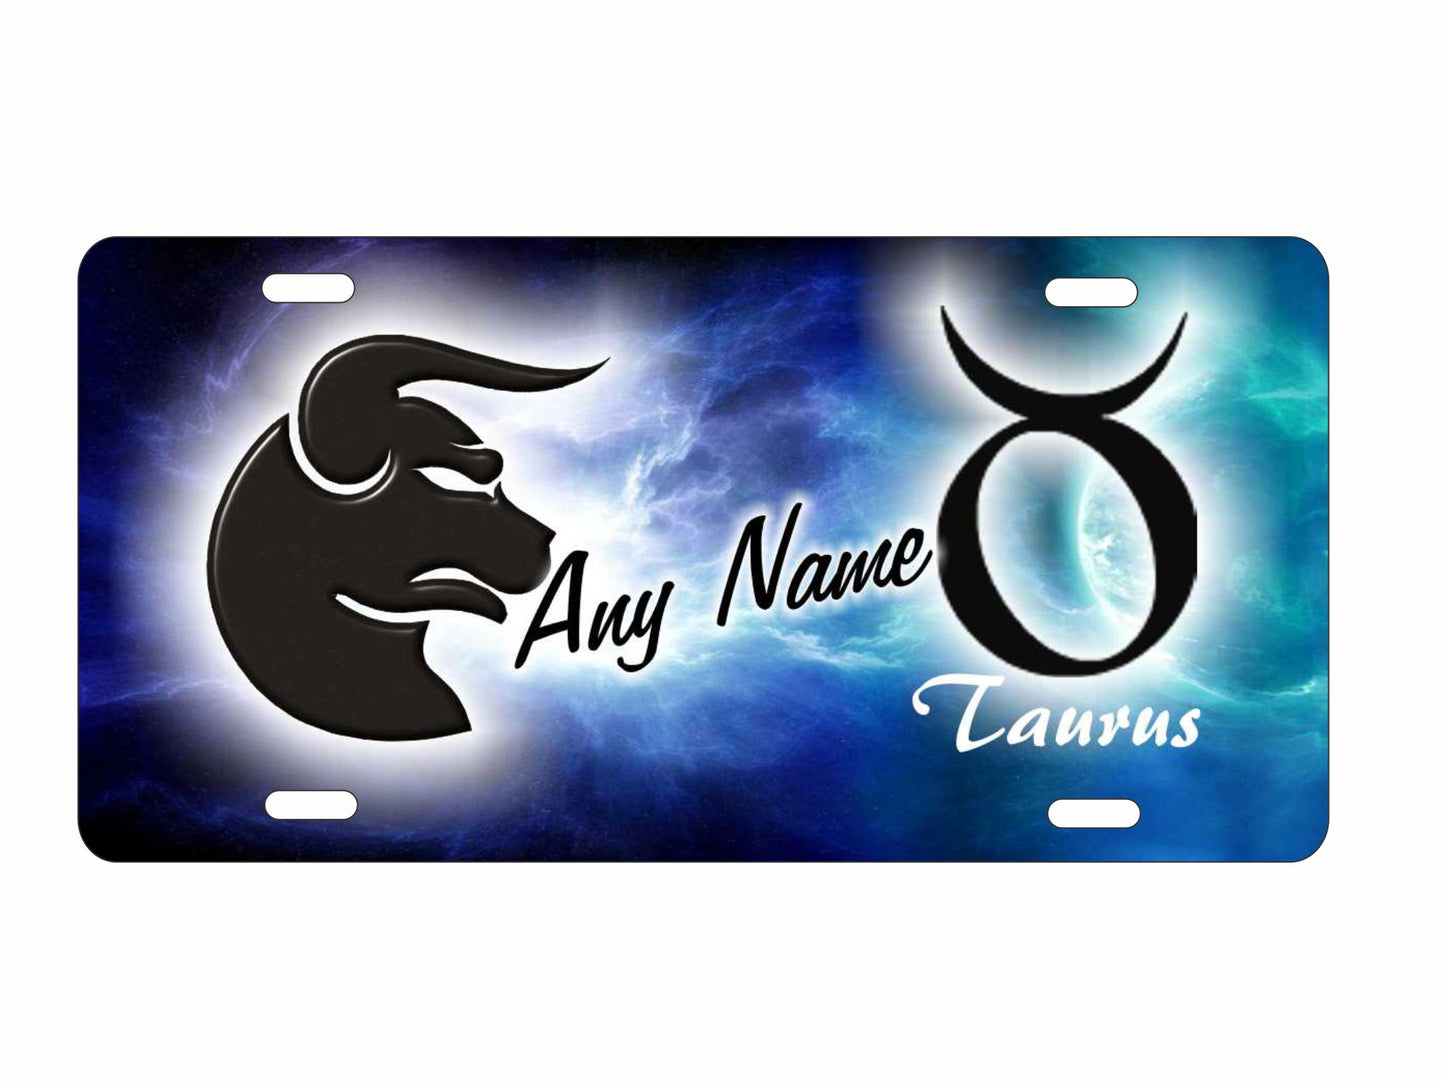 Taurus zodiac symbol Astrological sign personalized novelty decorative front license plate